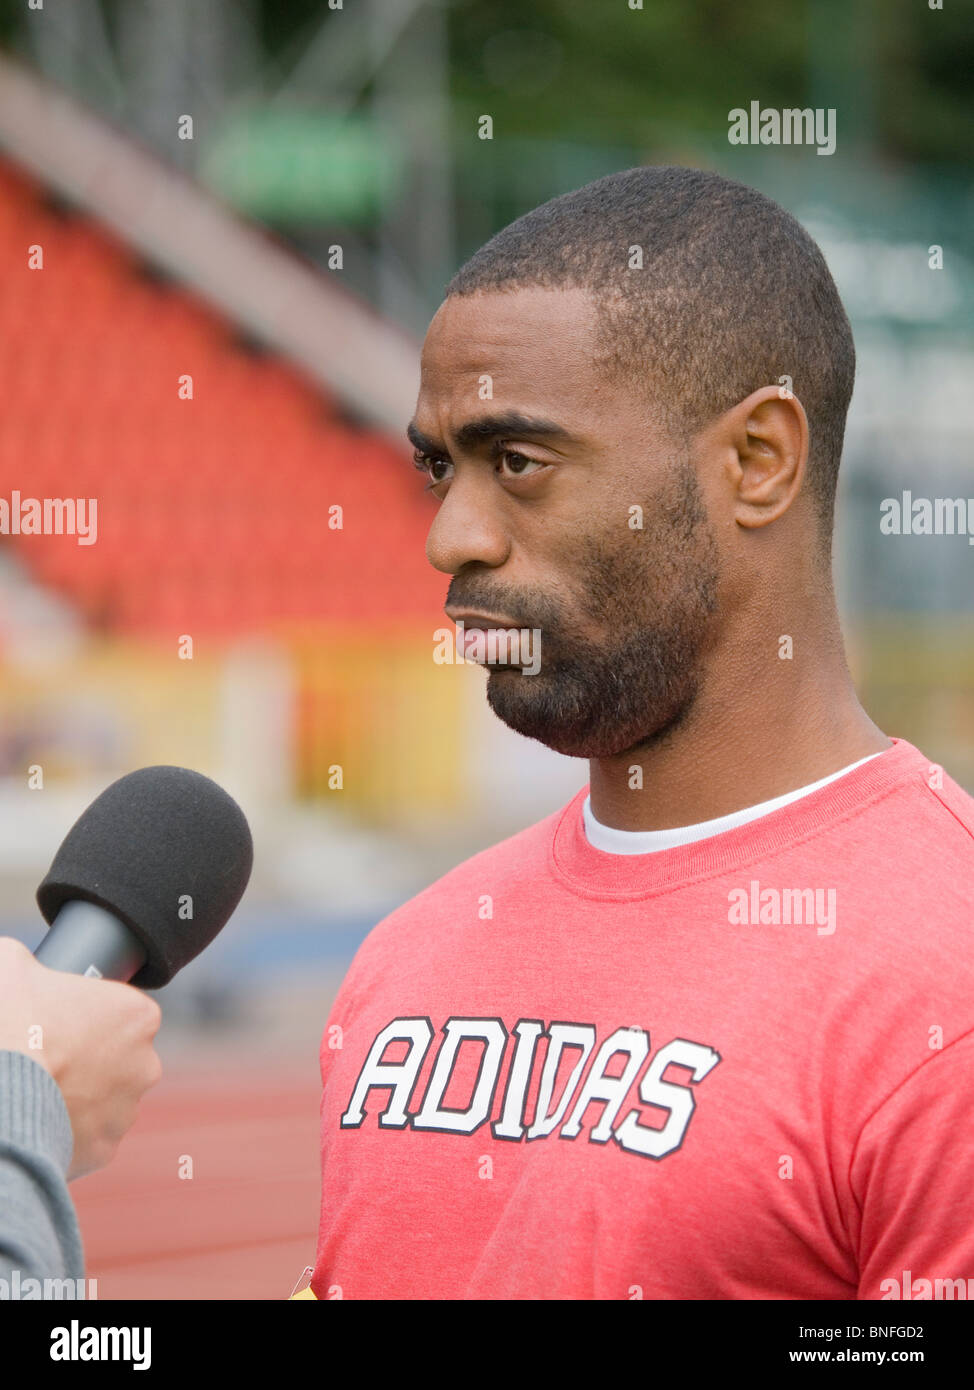 Tyson Gay being interviewed after the press conference prior to the Aviva British Grand Prix in Gateshead 2010 Stock Photo